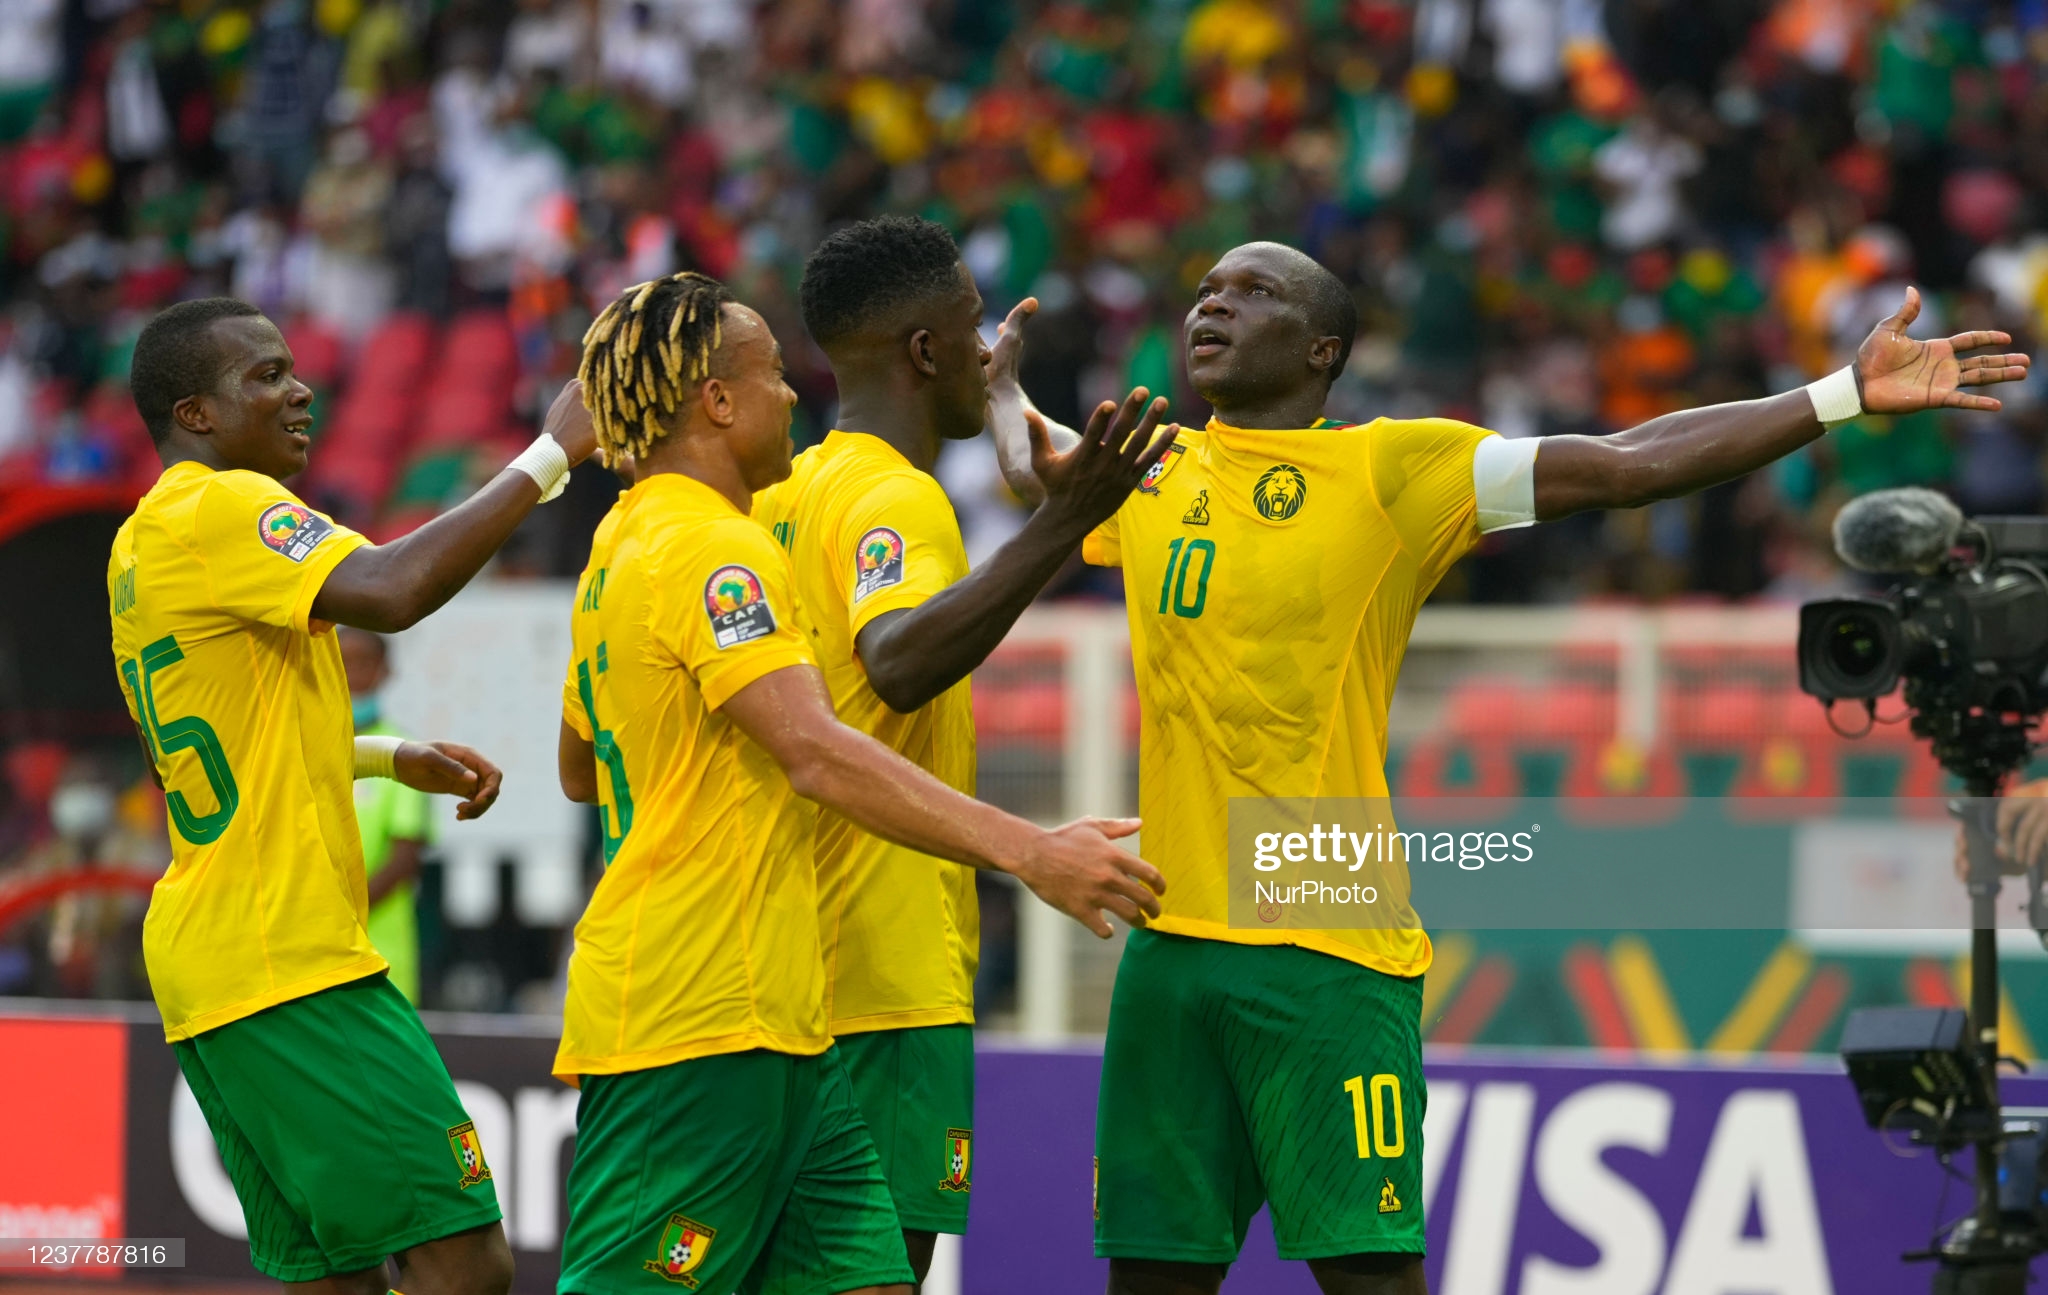 Vincent Aboubakar of Cameroon celebrates scoring their first goal  during Cameroun versus Cap Verde, African Cup of Nations, at Olempe Stadium on January 17, 2022. (Photo by Ulrik Pedersen/NurPhoto via Getty Images)